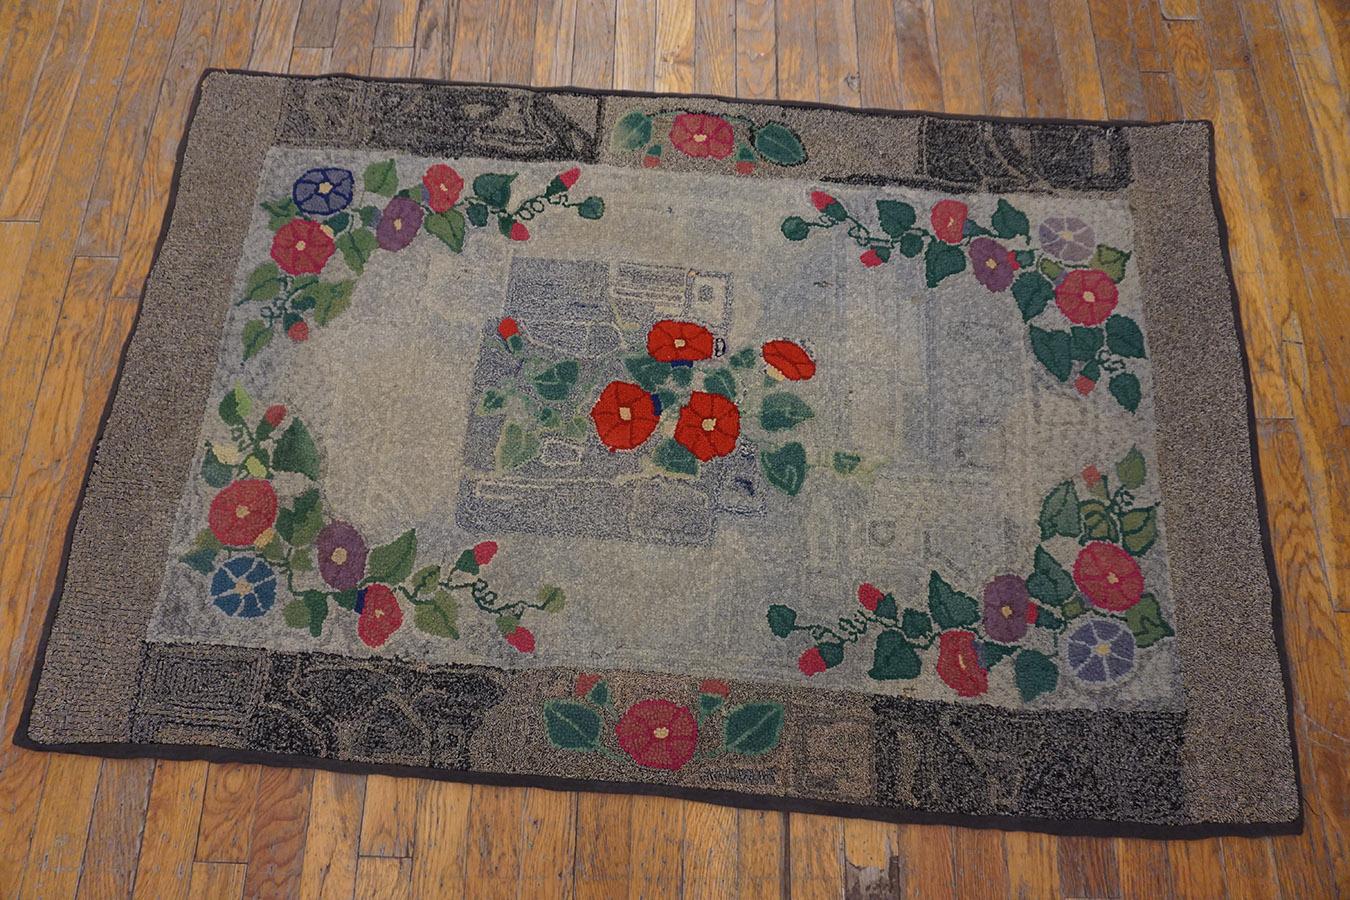 Hand-Woven 1930s American Hooked Rug ( 3 x 4'9